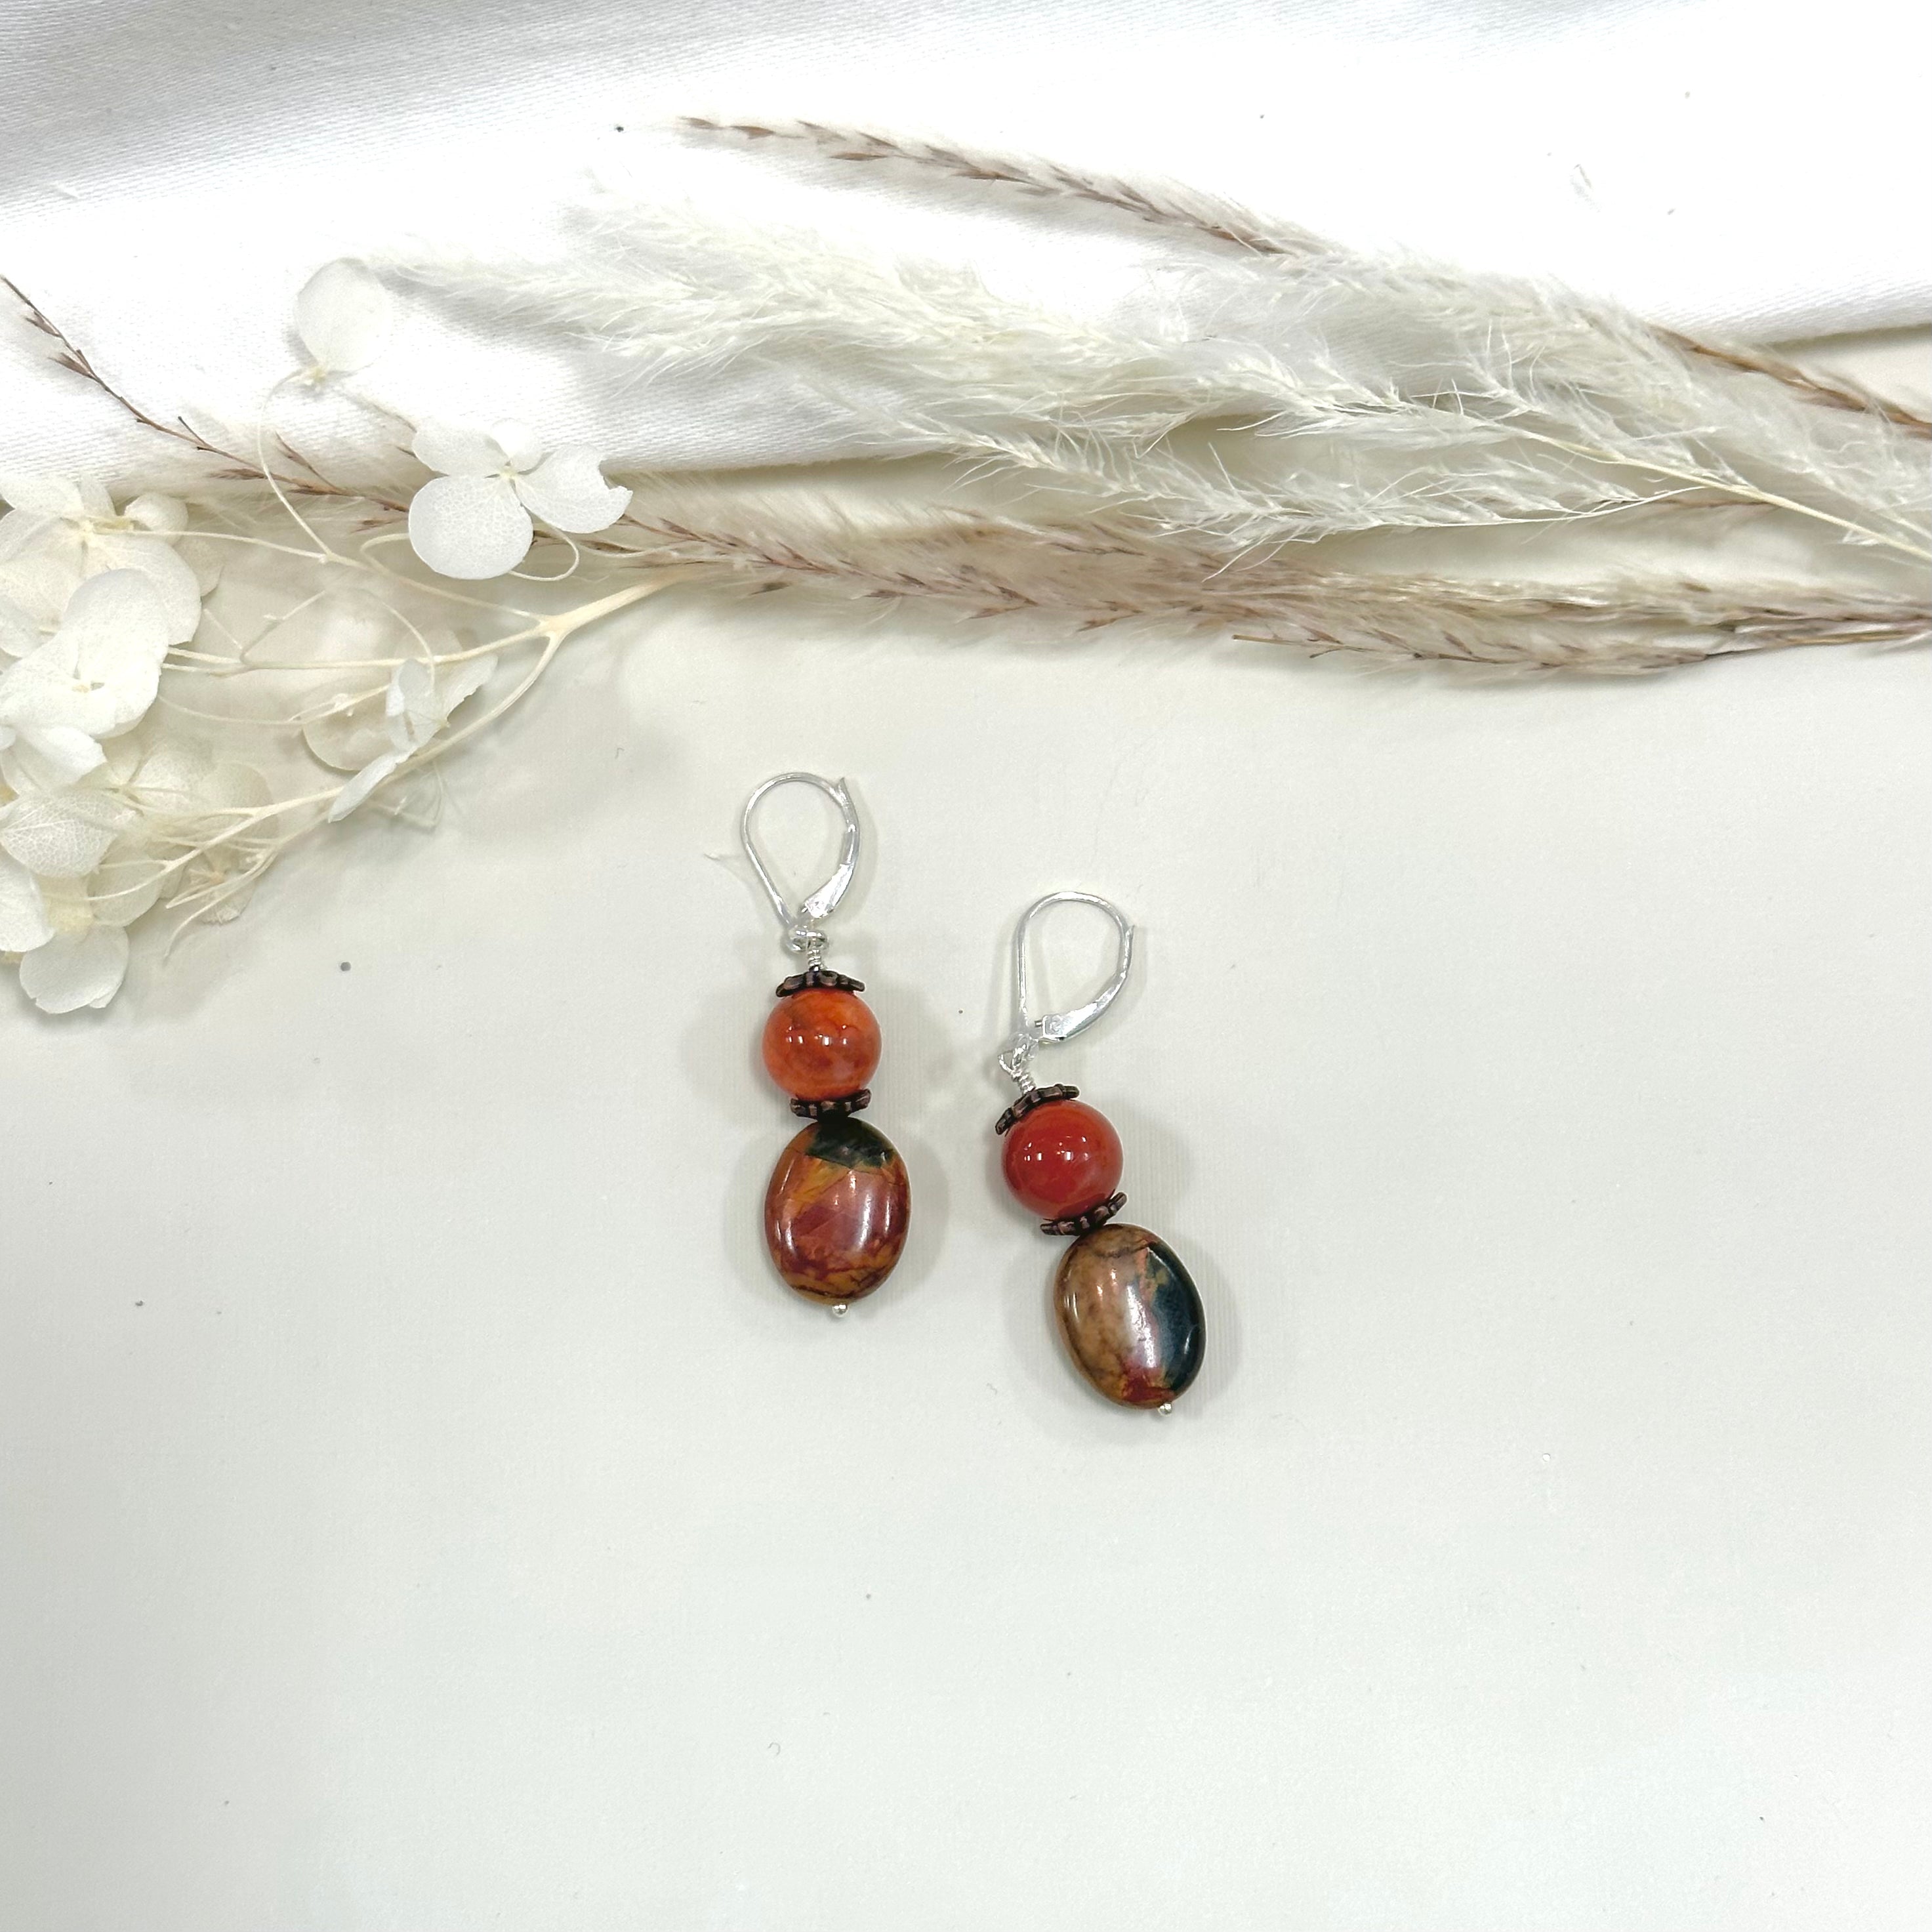 Round and Oval Agate Dangling Earrings